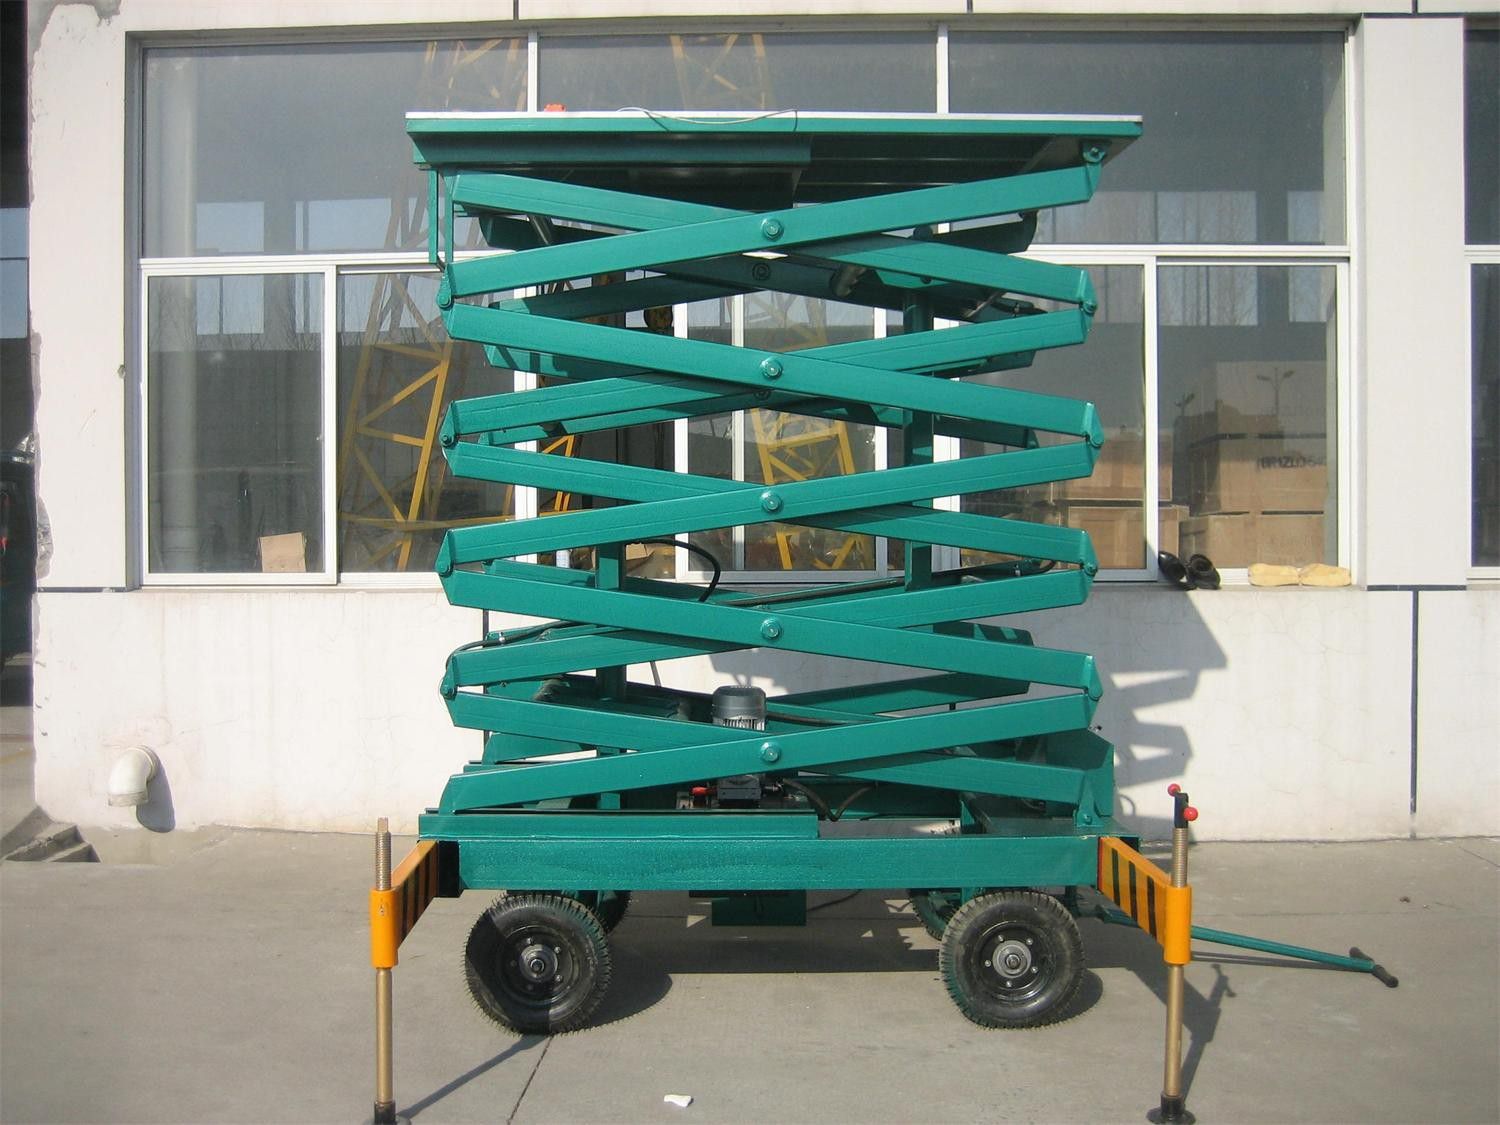 LimogesHydraulic lifting platform truckWhat should be paid attention to when choosing